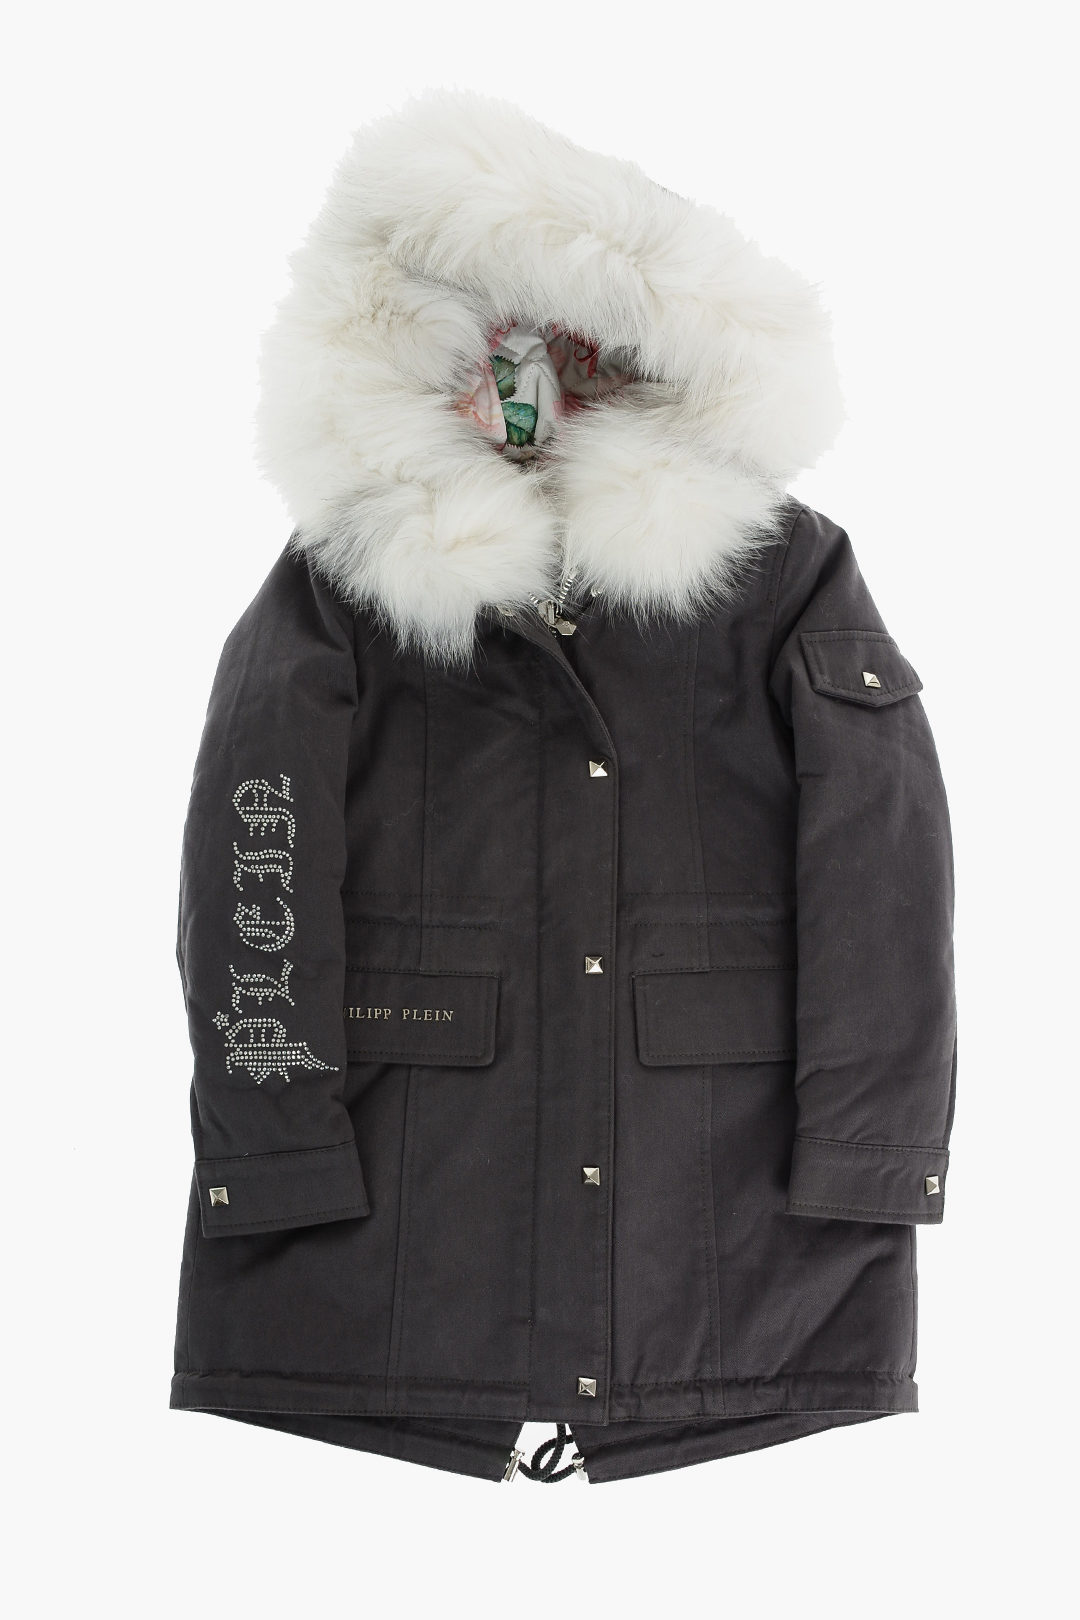 Philipp Plein Parka with inner and fur detail girls - Glamood Outlet